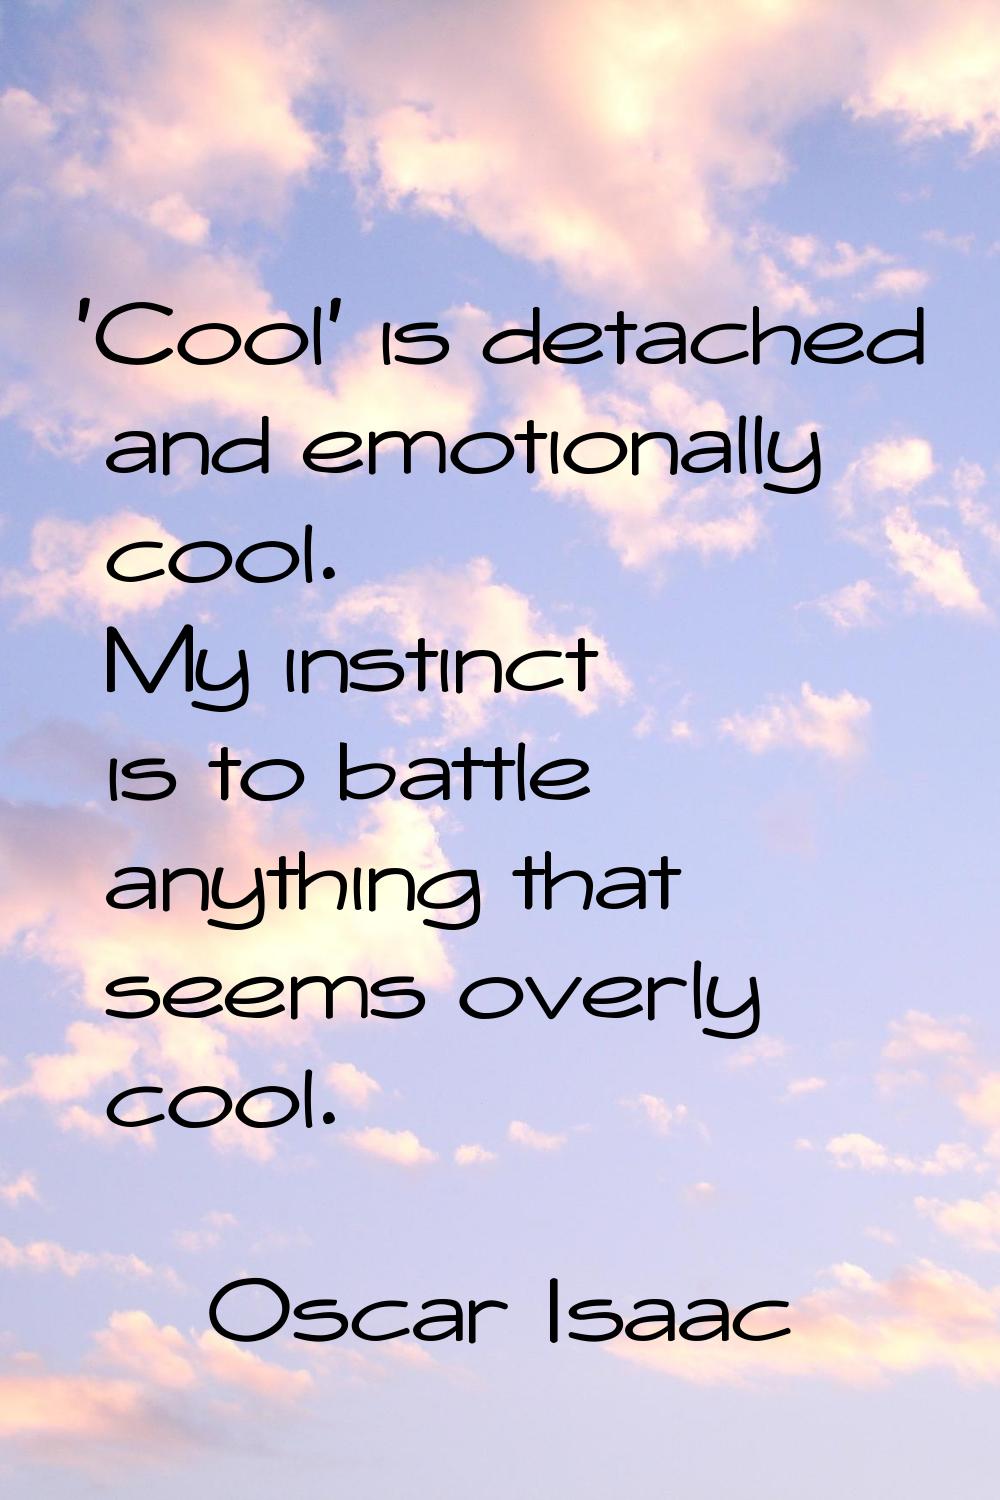 'Cool' is detached and emotionally cool. My instinct is to battle anything that seems overly cool.